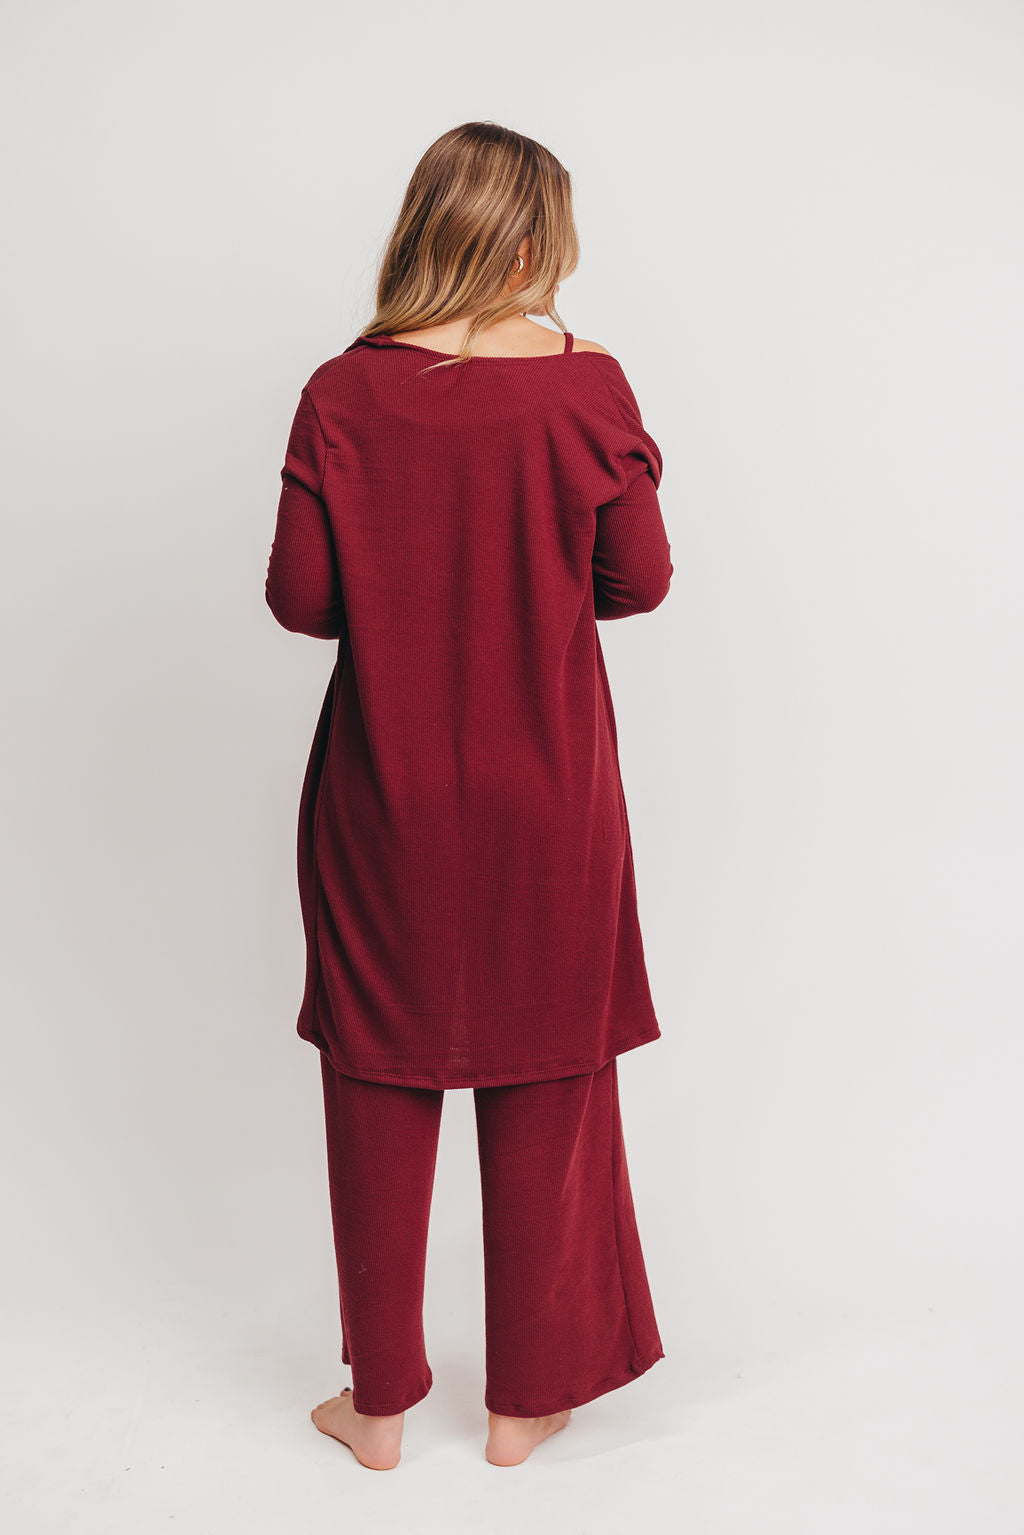 Betsy Ribbed Cardigan in Burgundy - Inclusive Sizing (S-2X)